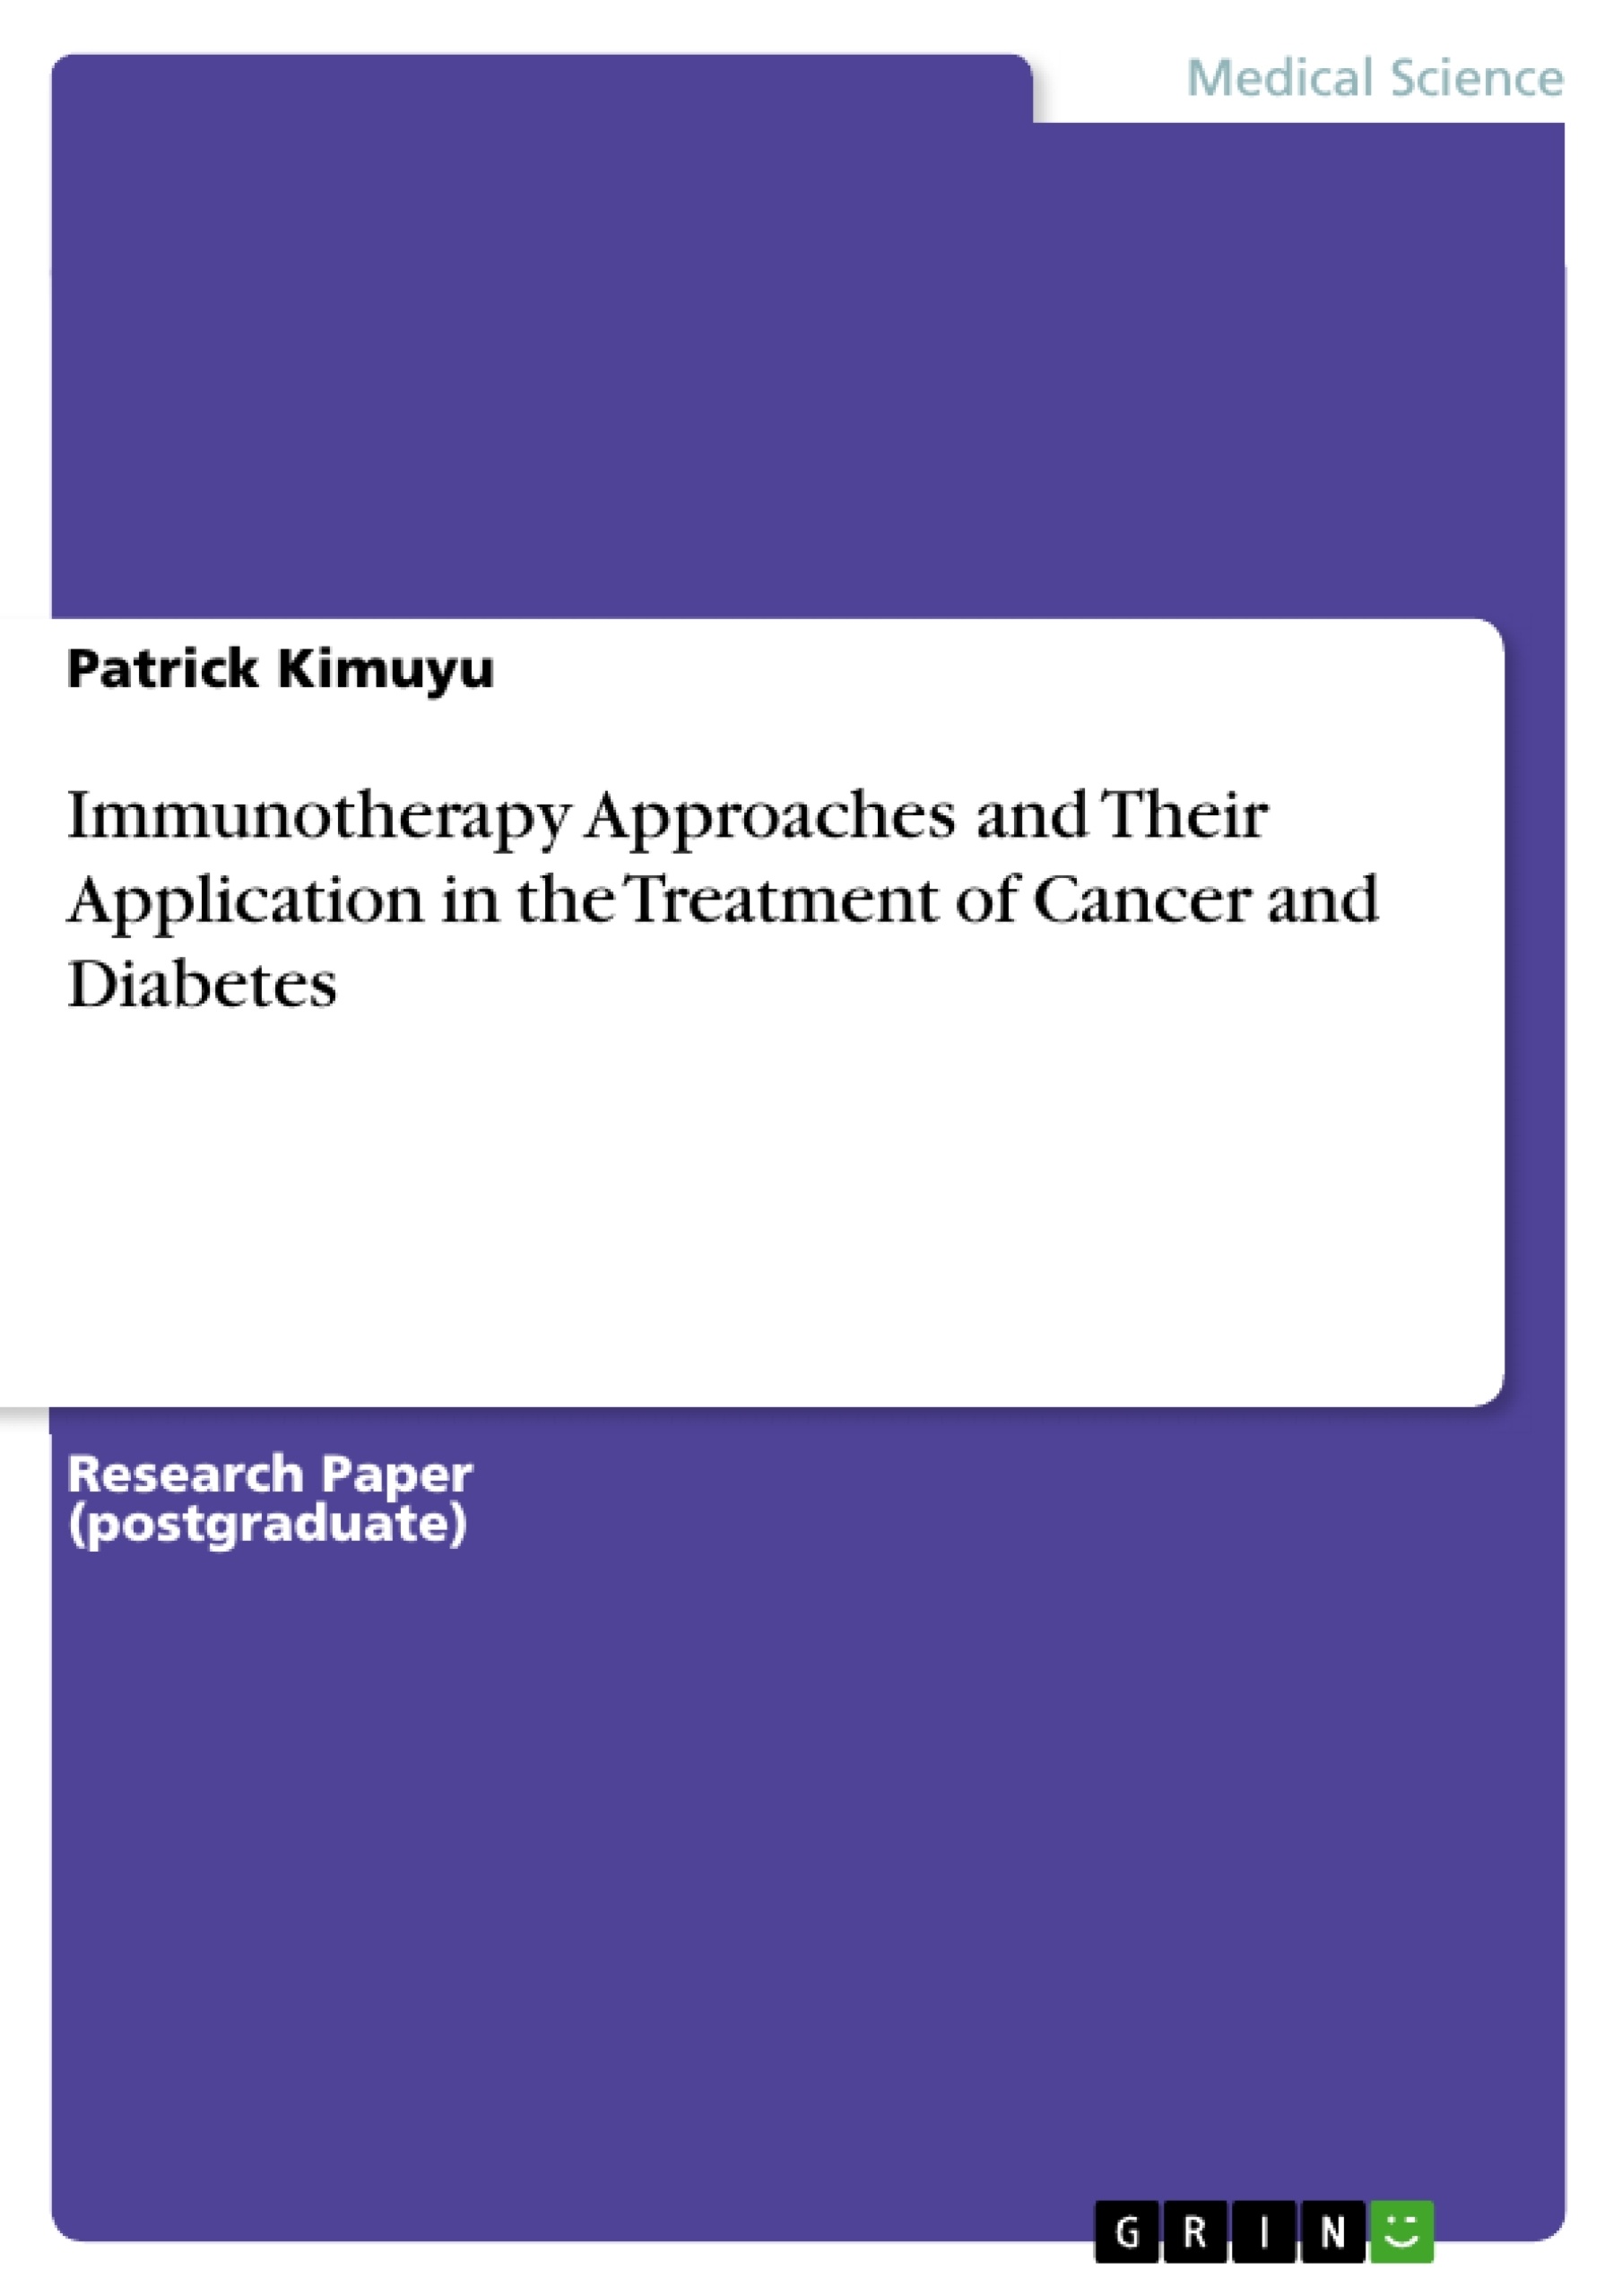 Titel: Immunotherapy Approaches and Their Application in the Treatment of Cancer and Diabetes